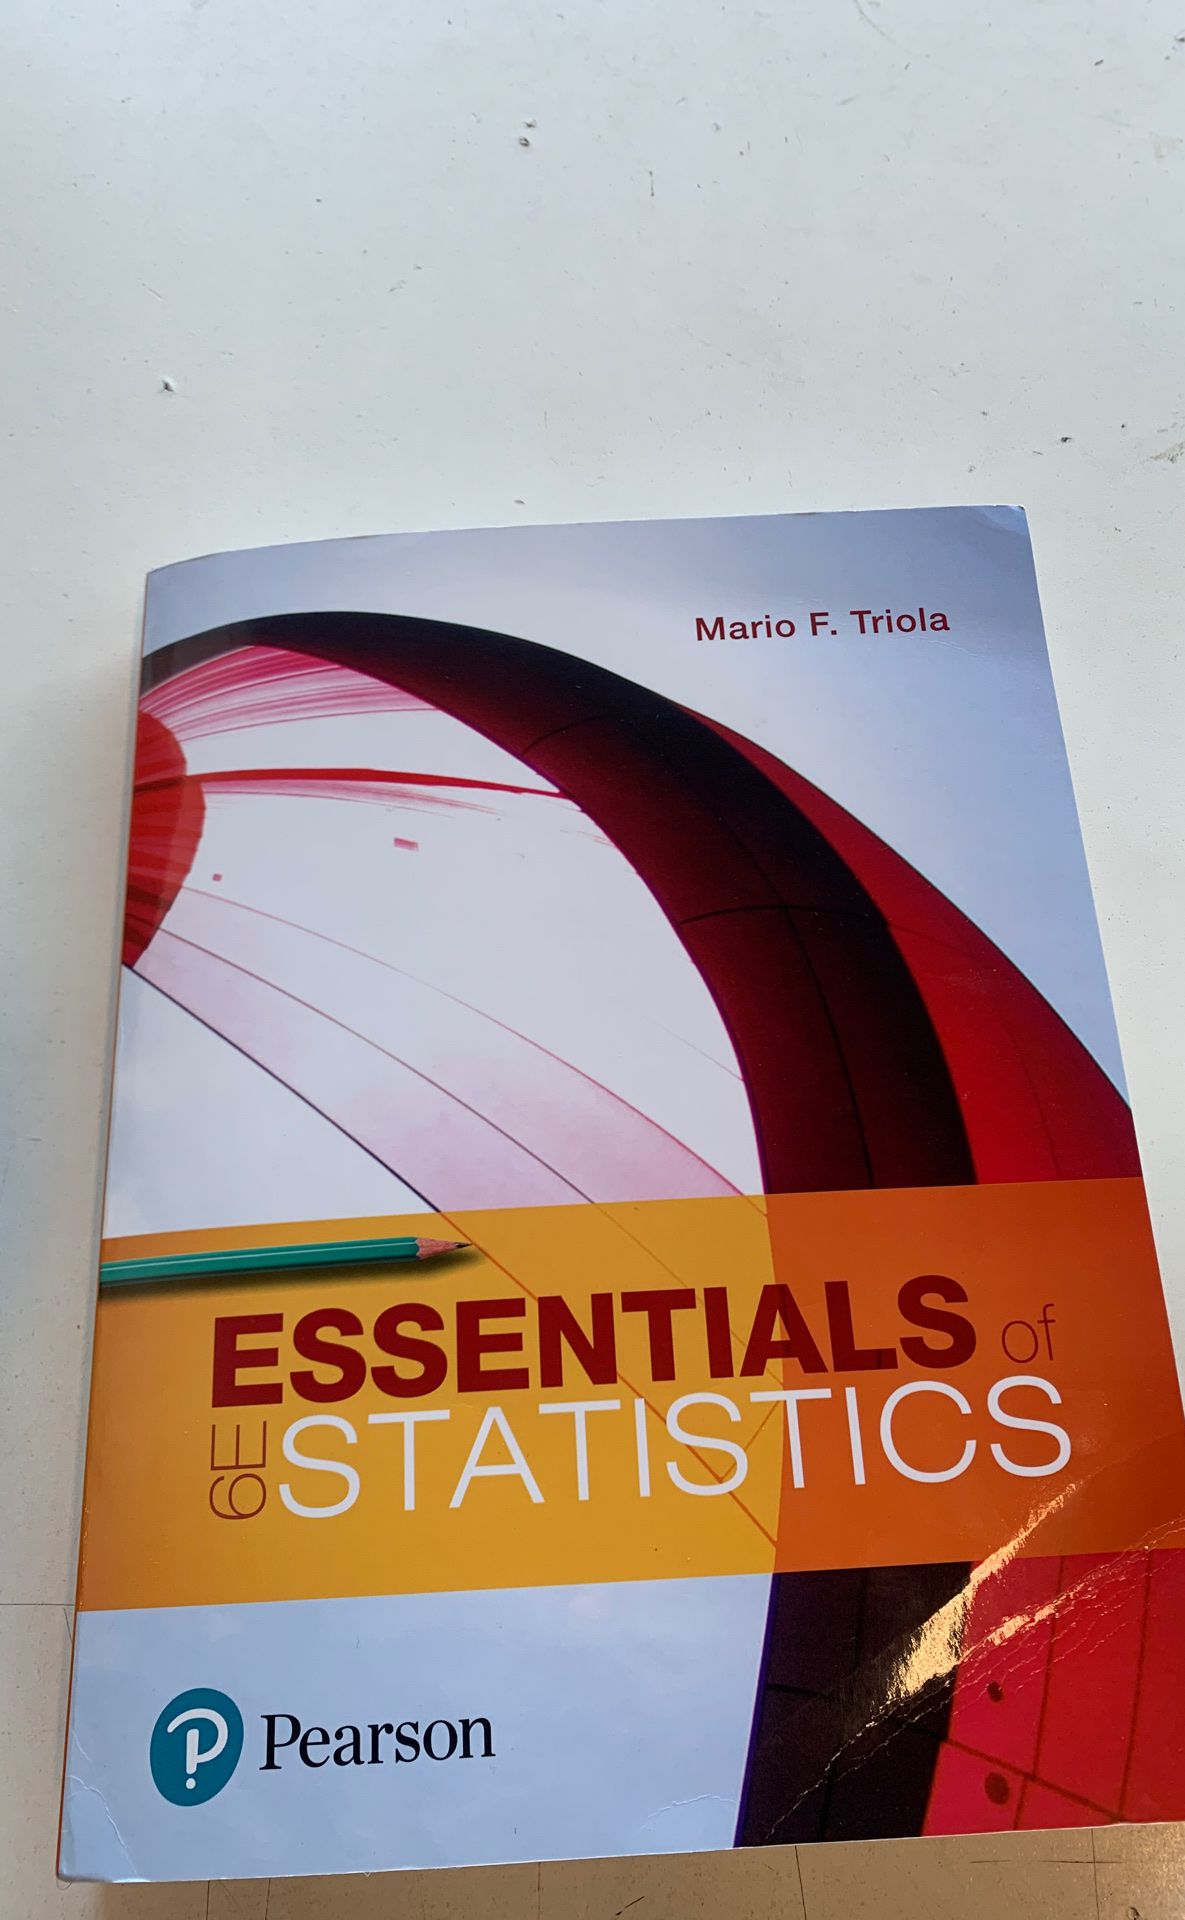 Statistics book for sale like new (no access code)